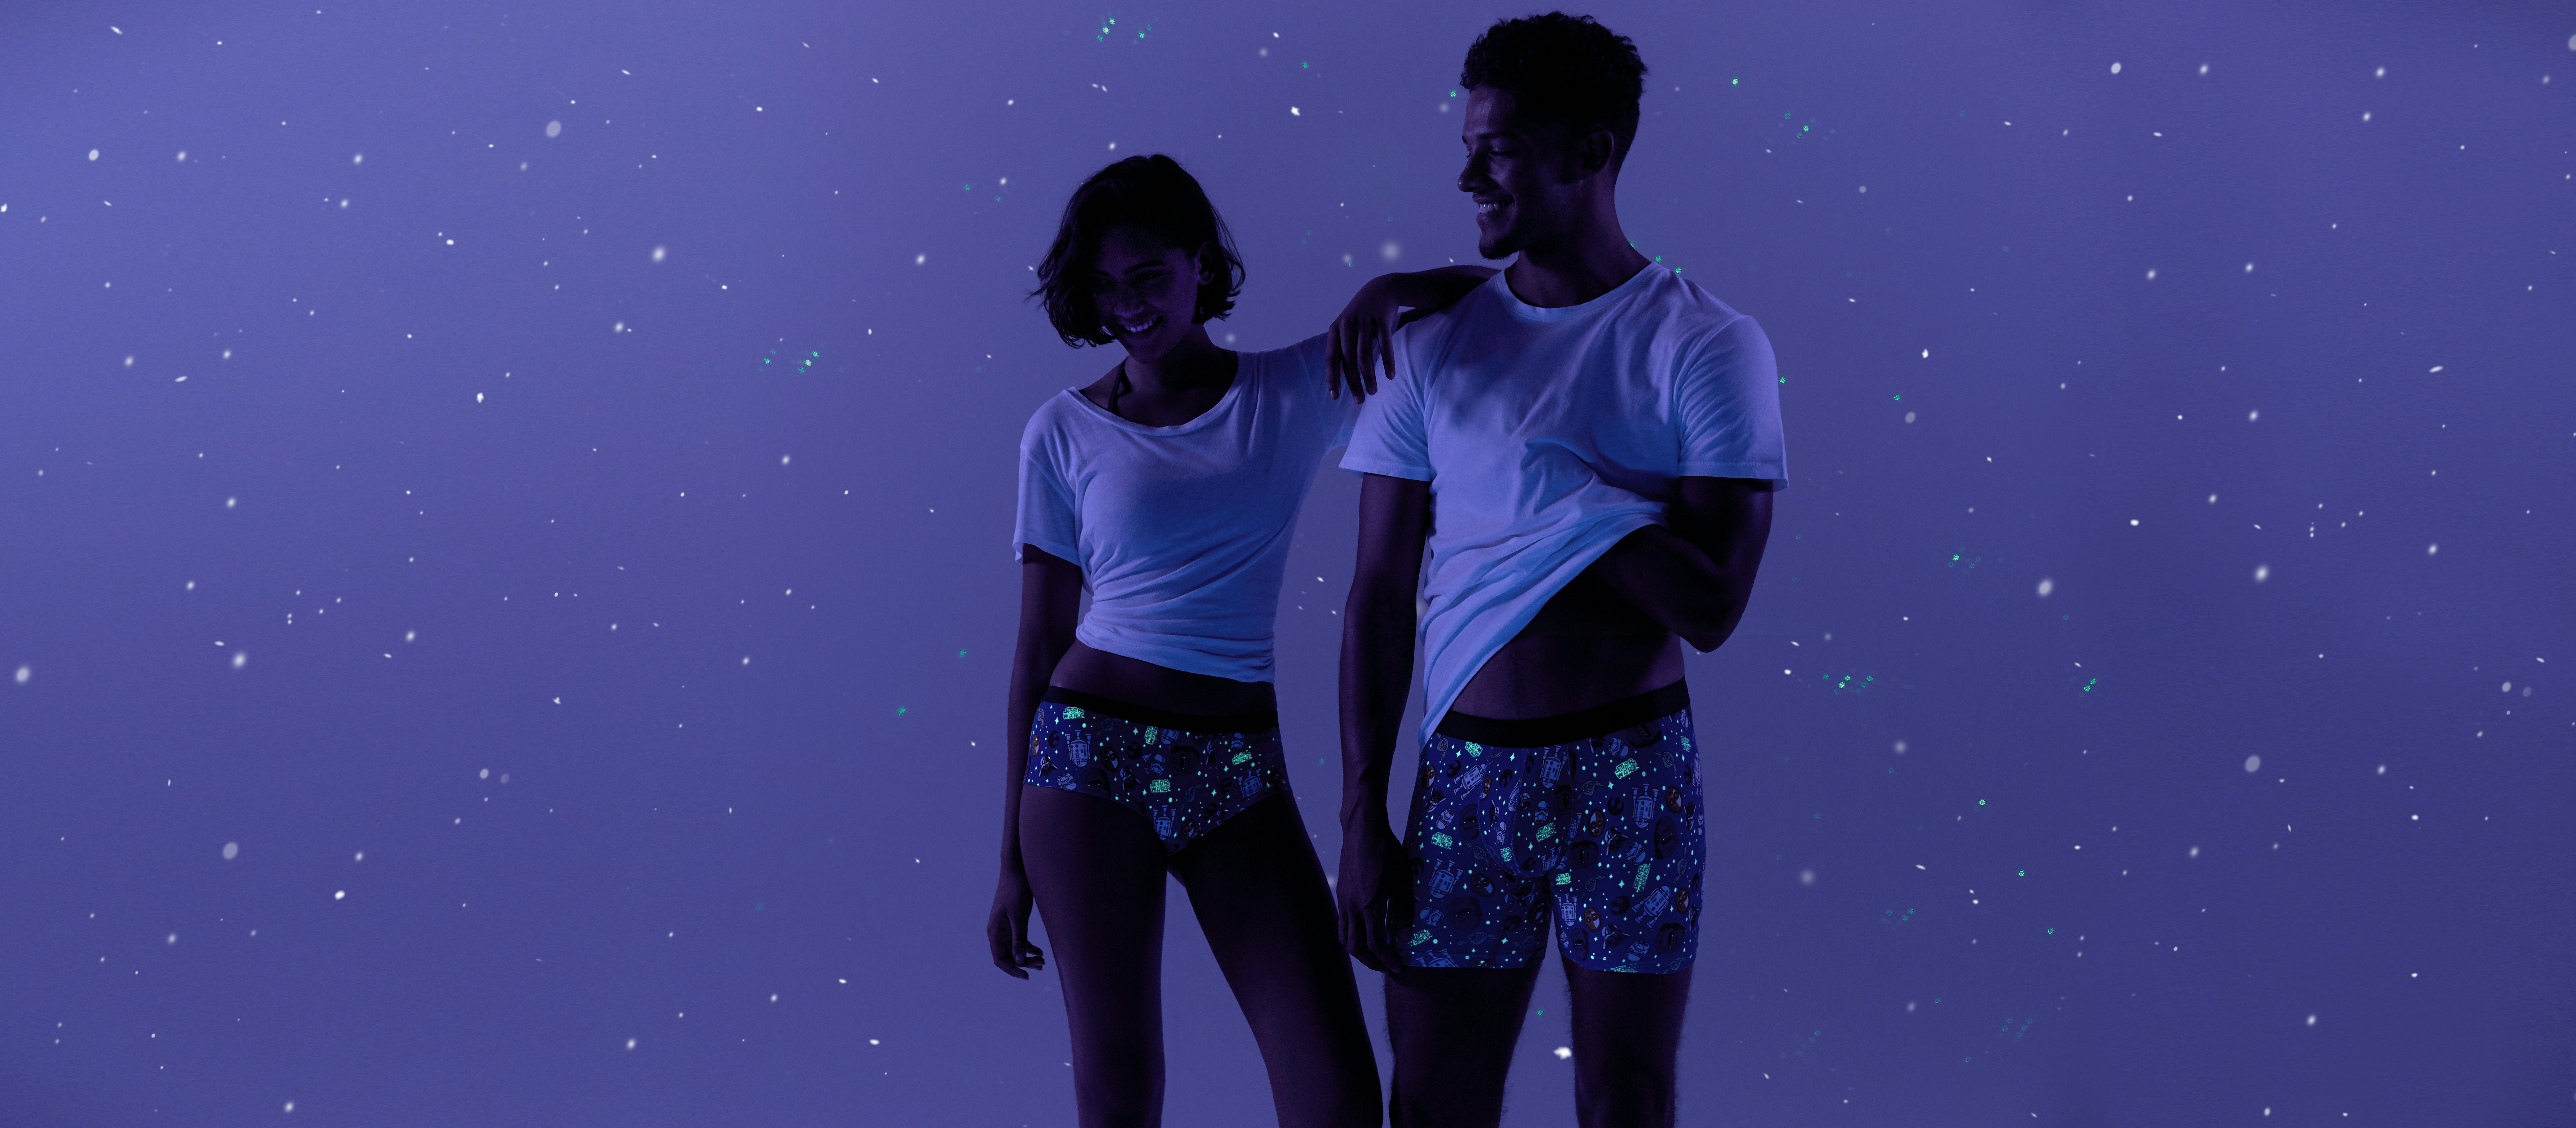 Where To Buy Glow-In-The-Dark 'Star Wars' MeUndies Because They're The Coolest  Underwear In The Galaxy